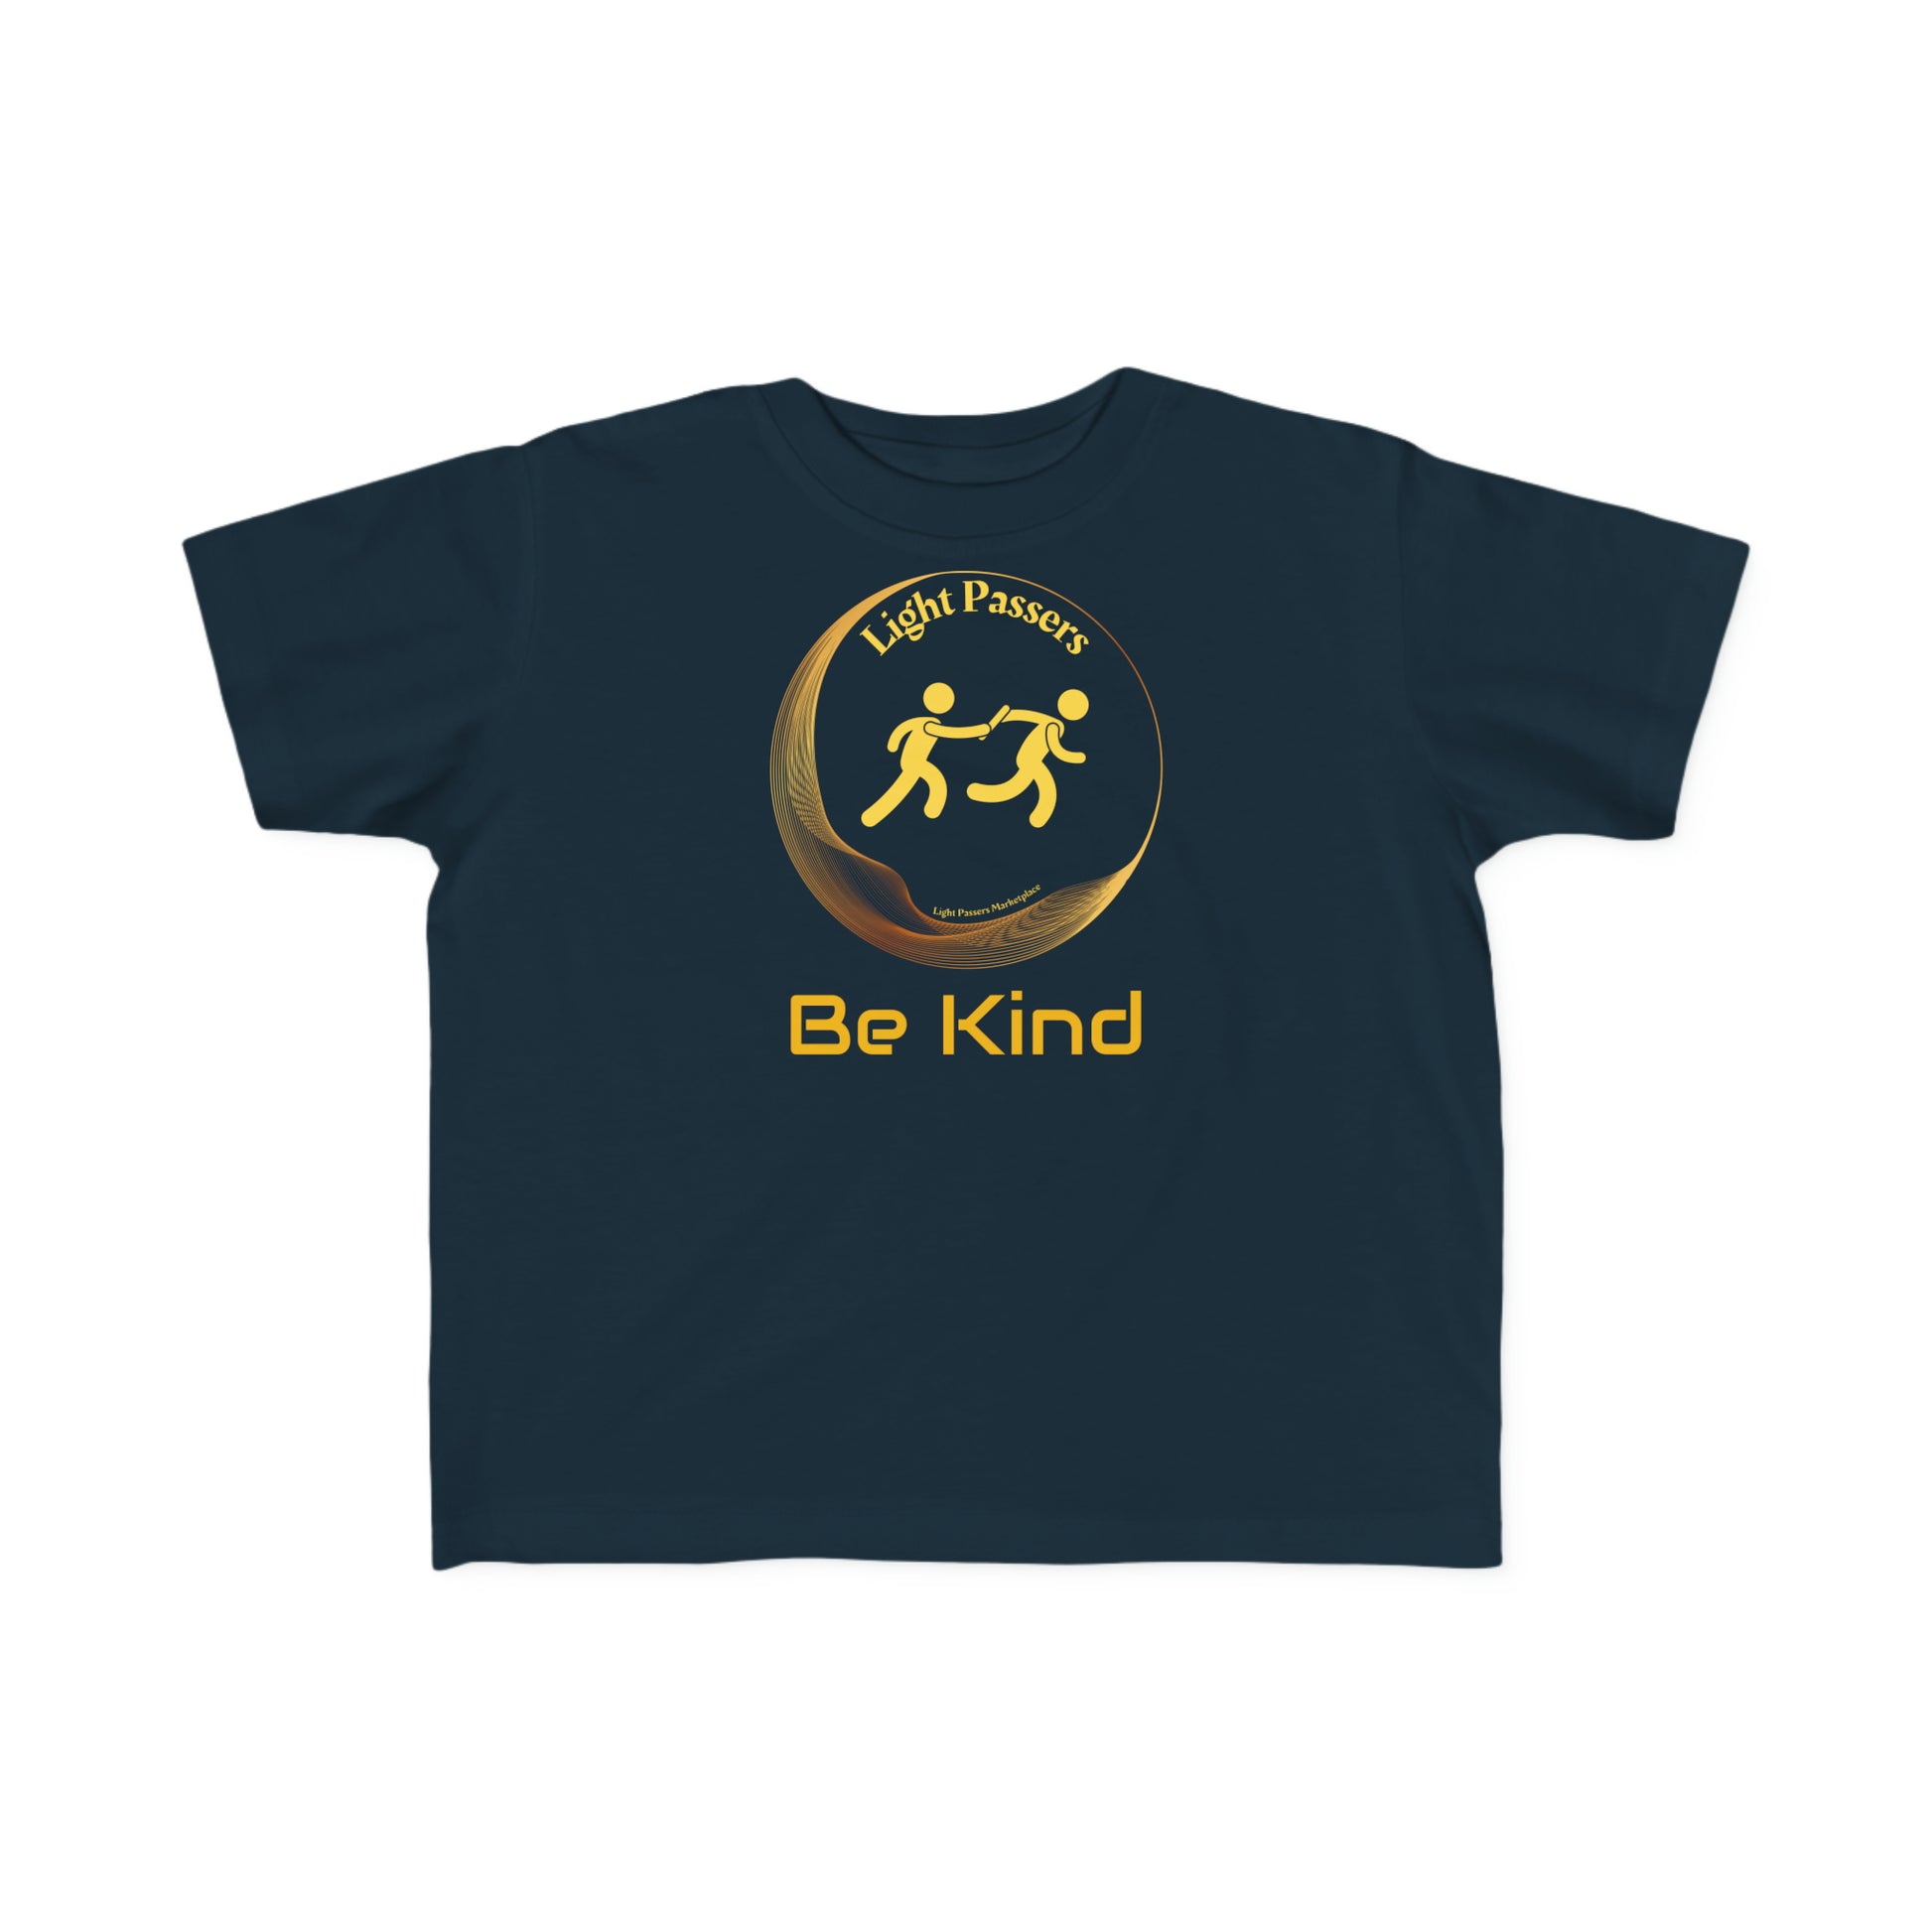 A toddler tee featuring the Light Passers Relay Be Kind design. Made of soft, durable cotton with a high-quality print. Classic fit, tear-away label, and true to size.